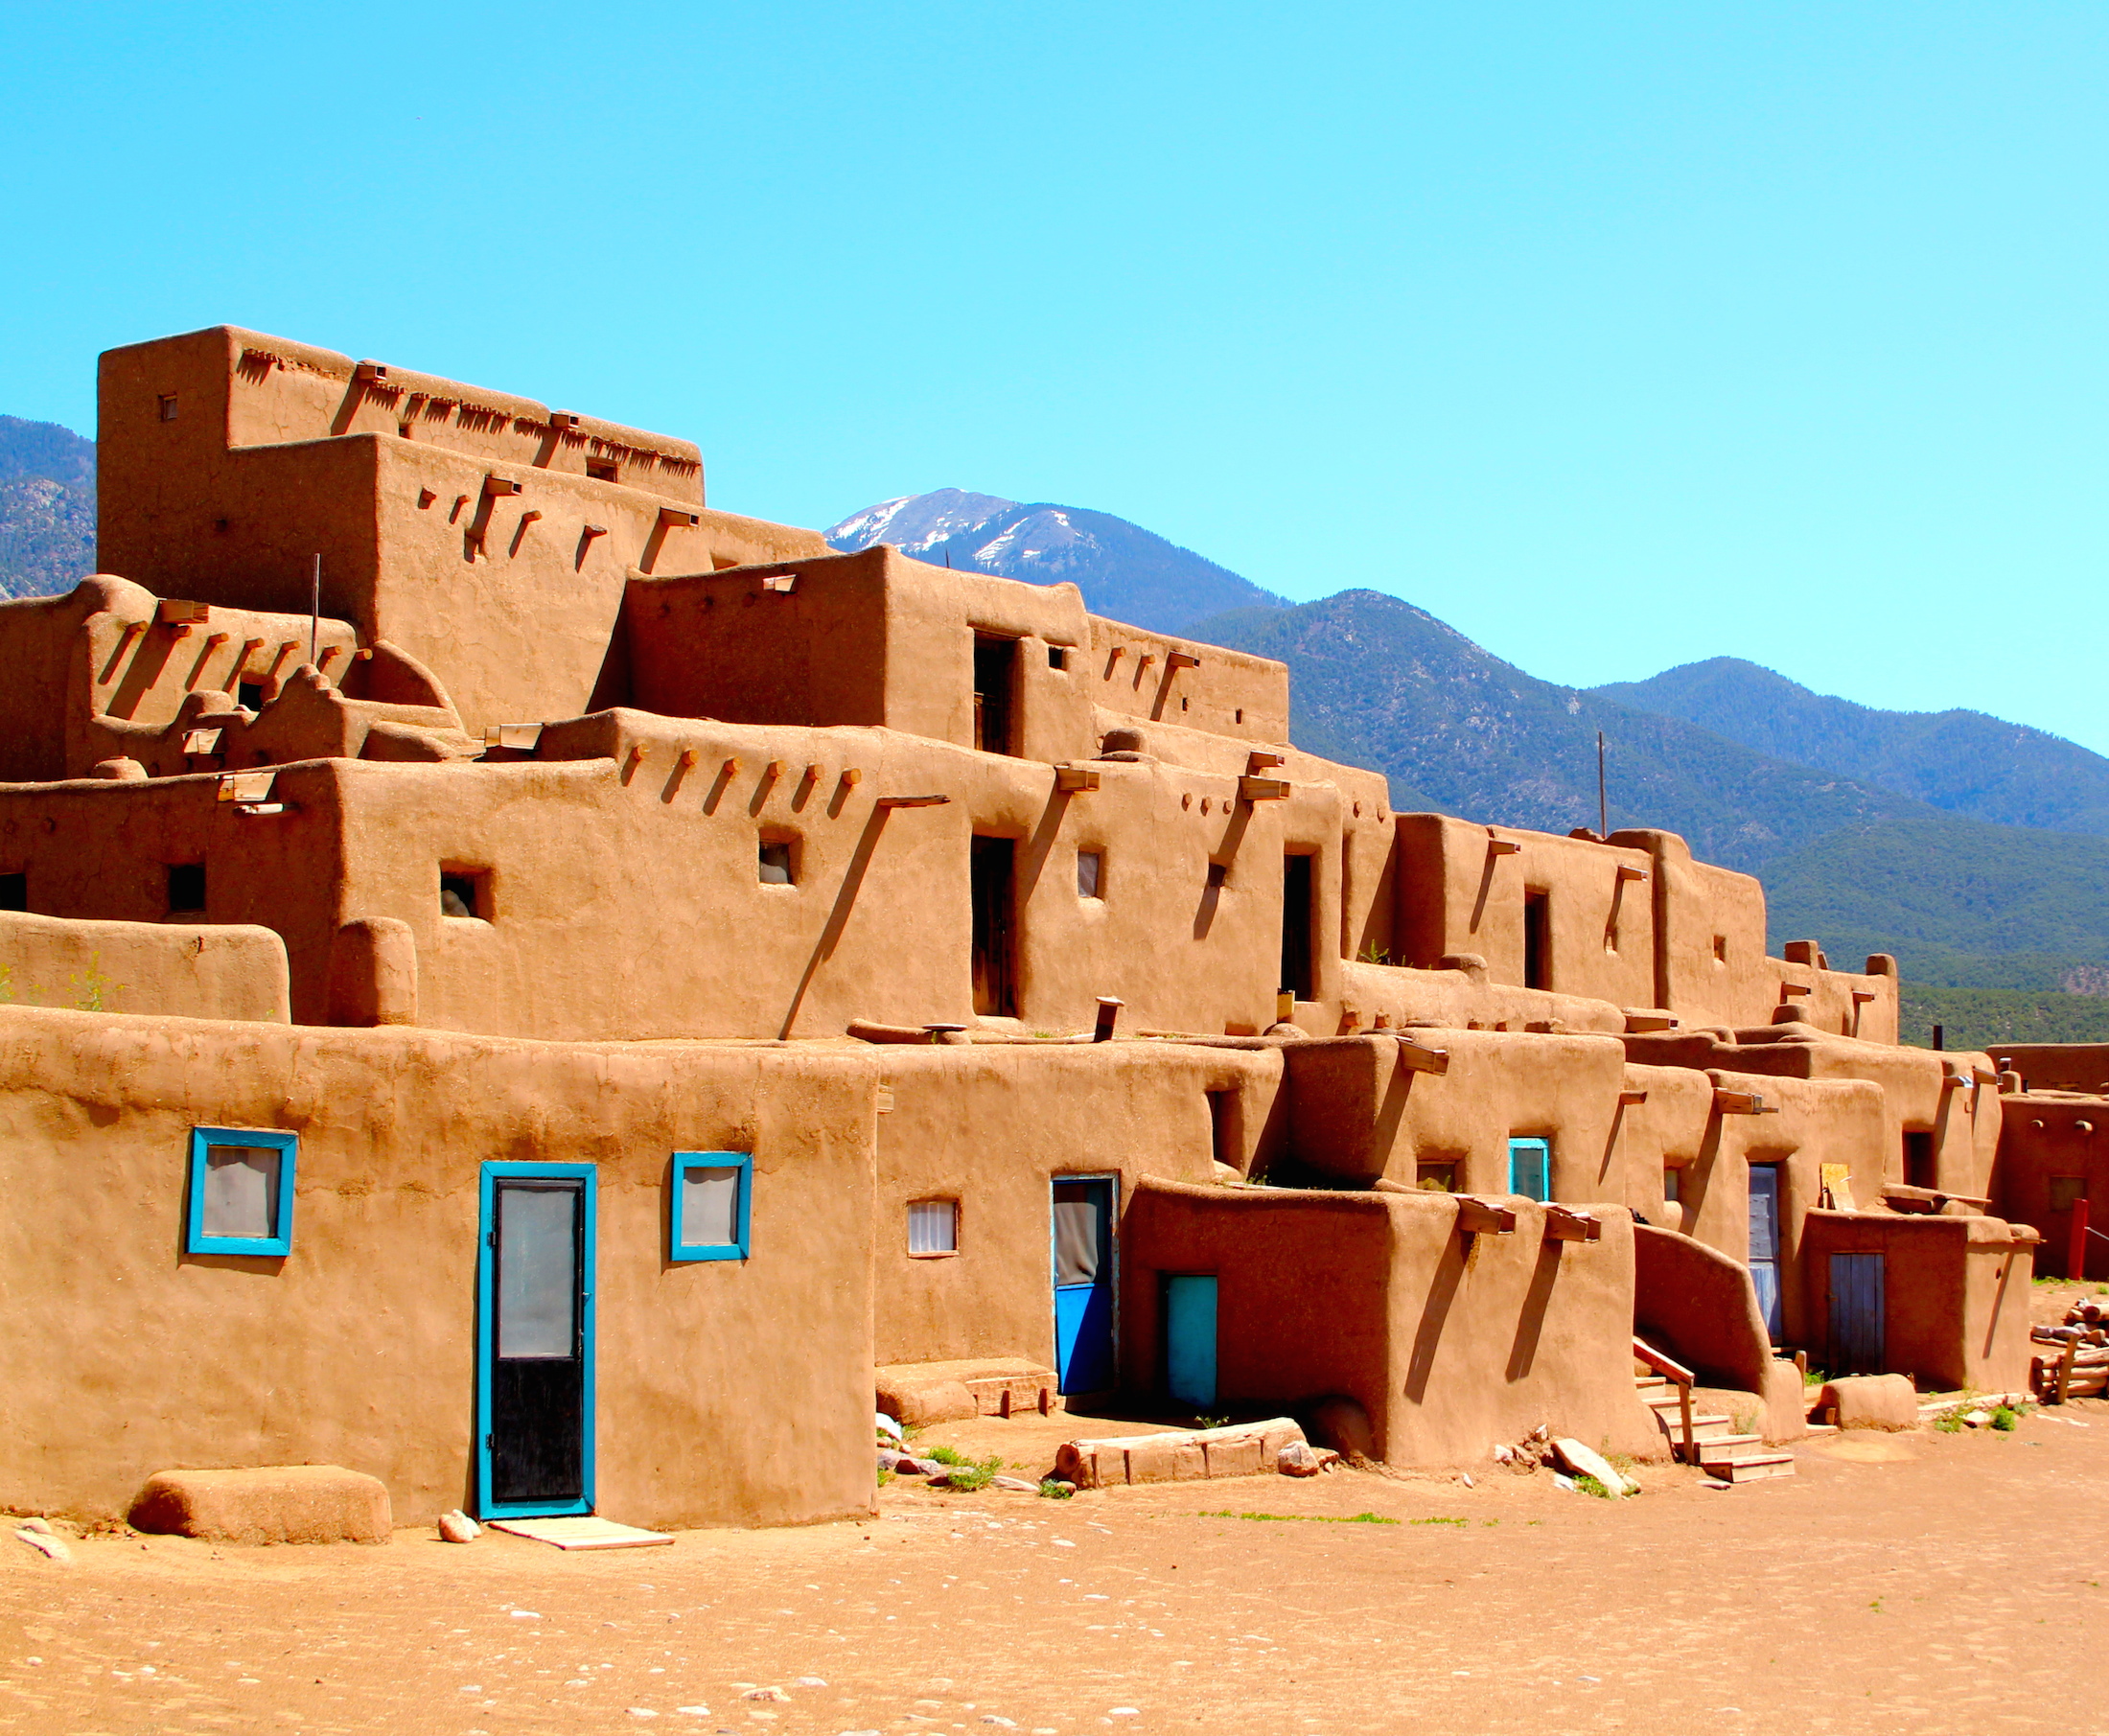 New Mexico’s Taos Pueblo, inhabited for 1,000 years